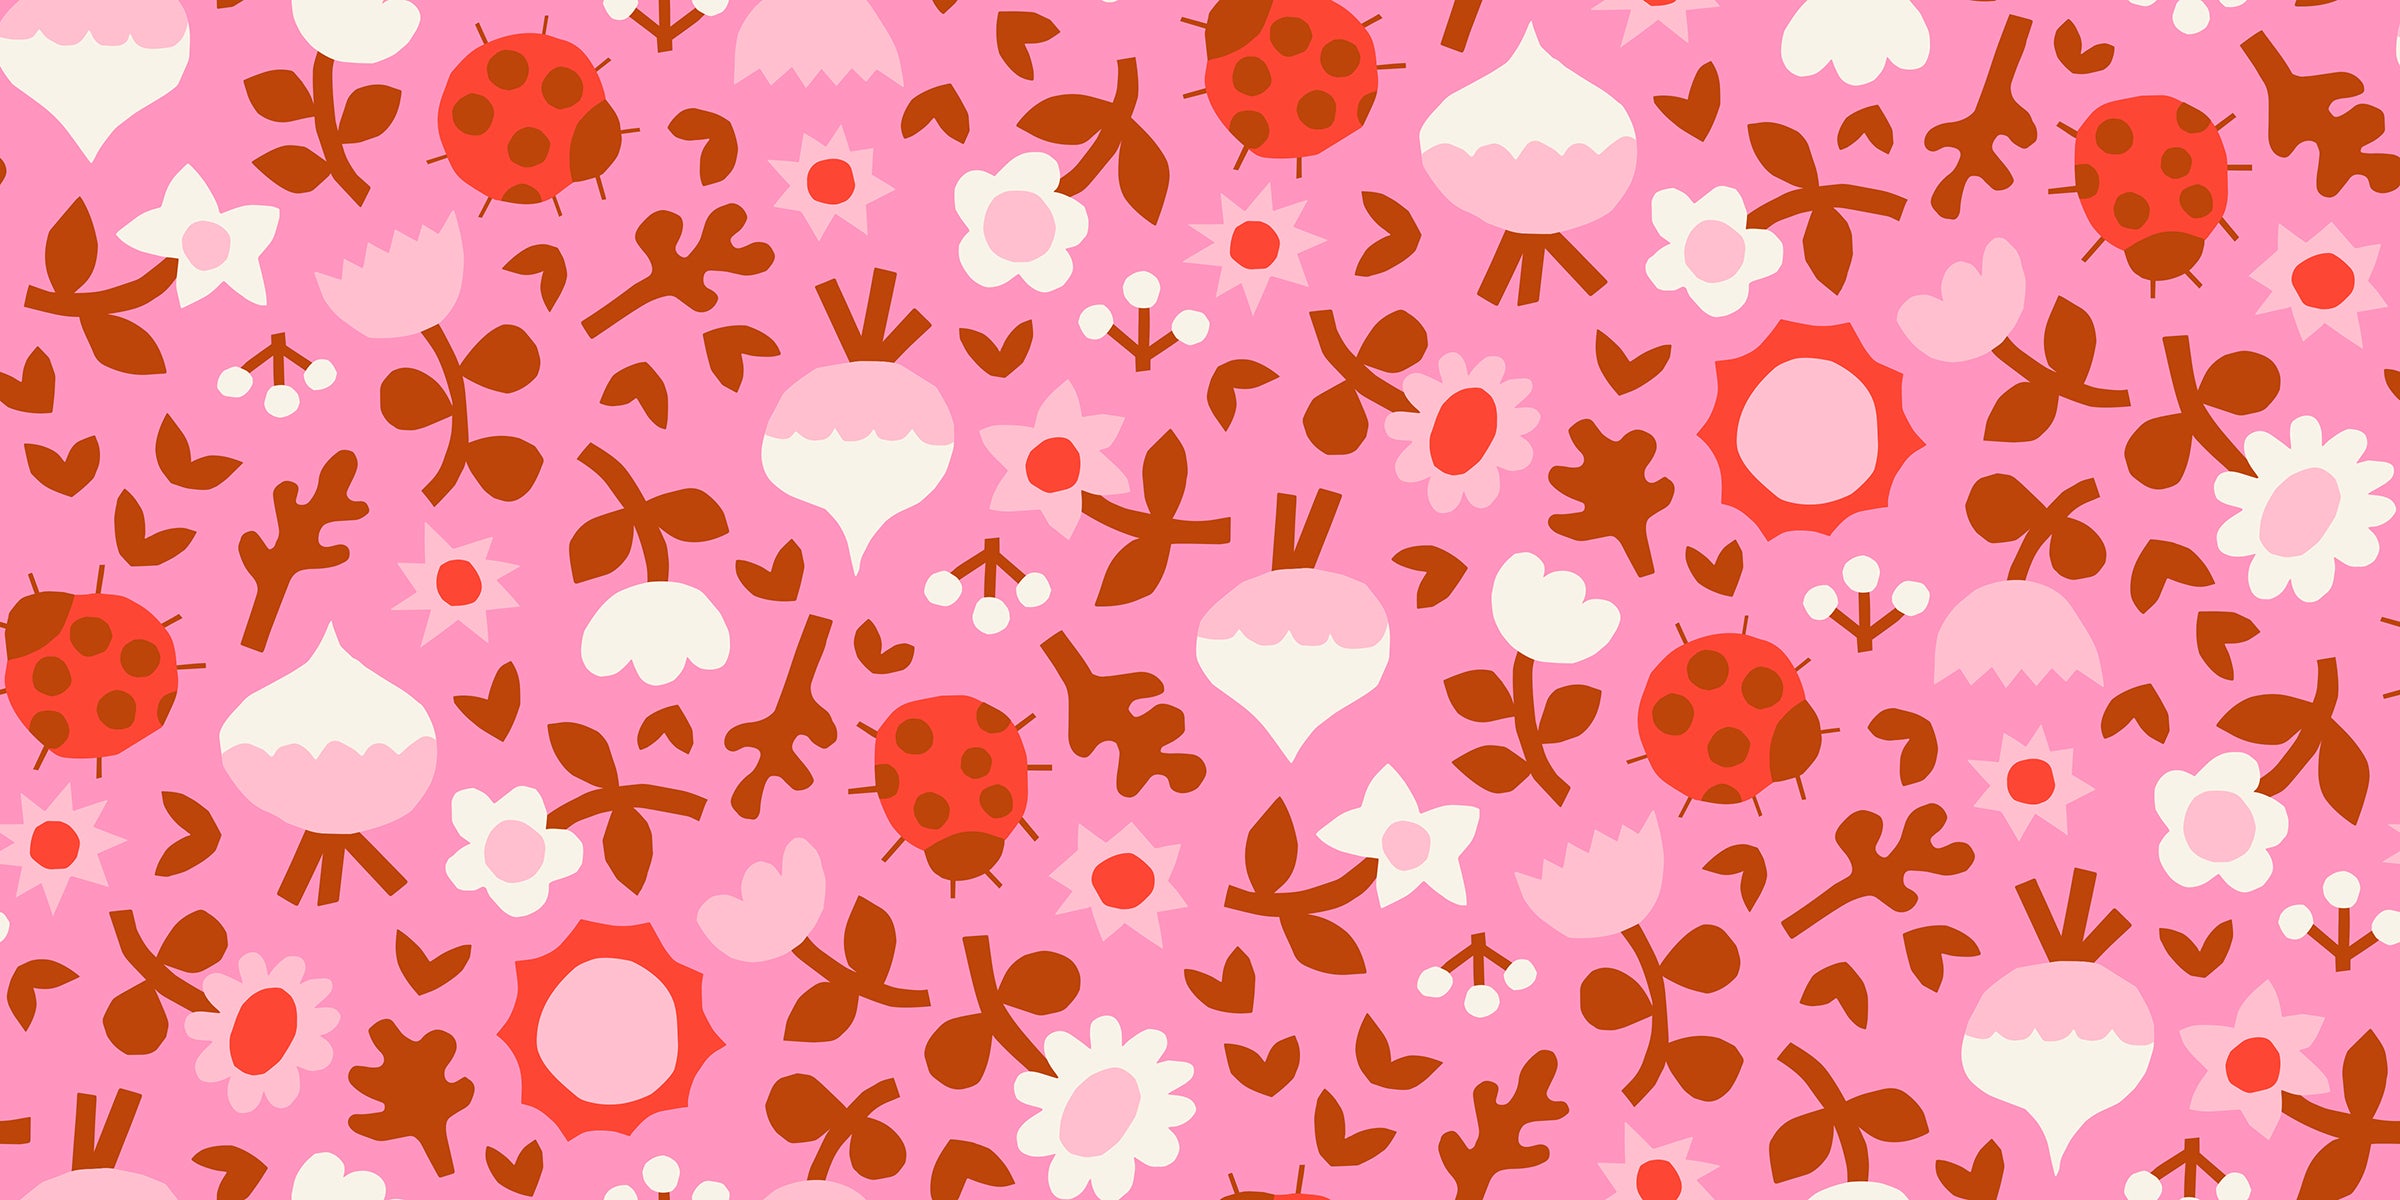 Petunia Quilt Fabric by Ruby Star Society - Clippings (Turnips, Ladybugs) in Flamingo Pink - RS3045 12